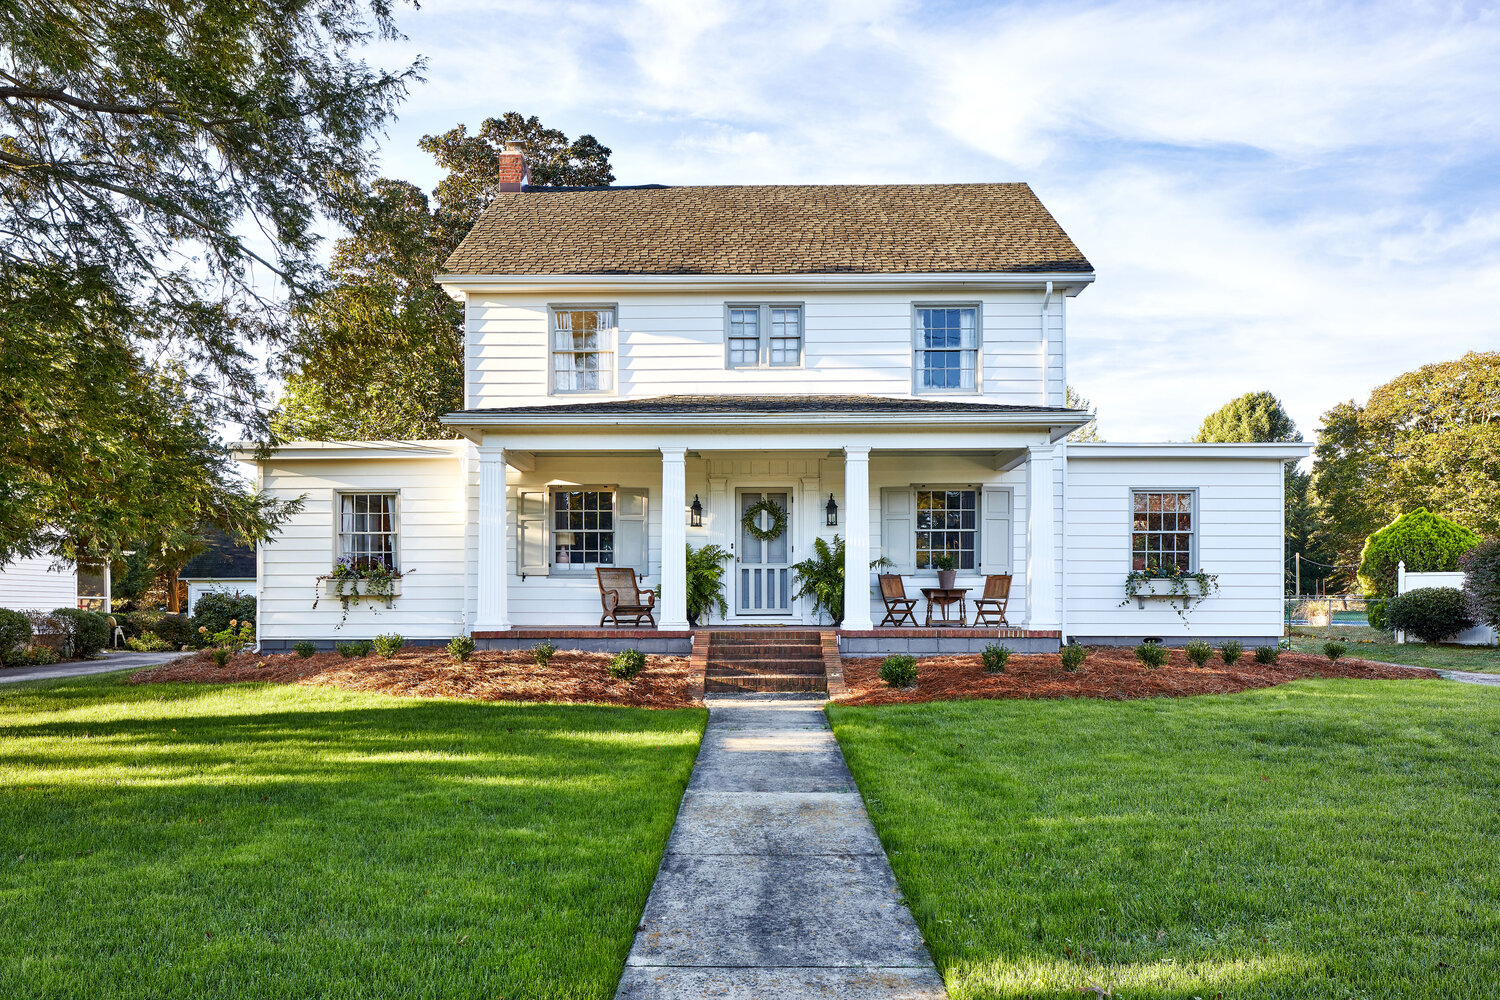 Home Tour :: a historic colonial revival in delaware full of charm and the best thrifted finds on www.thegritandpolish.com